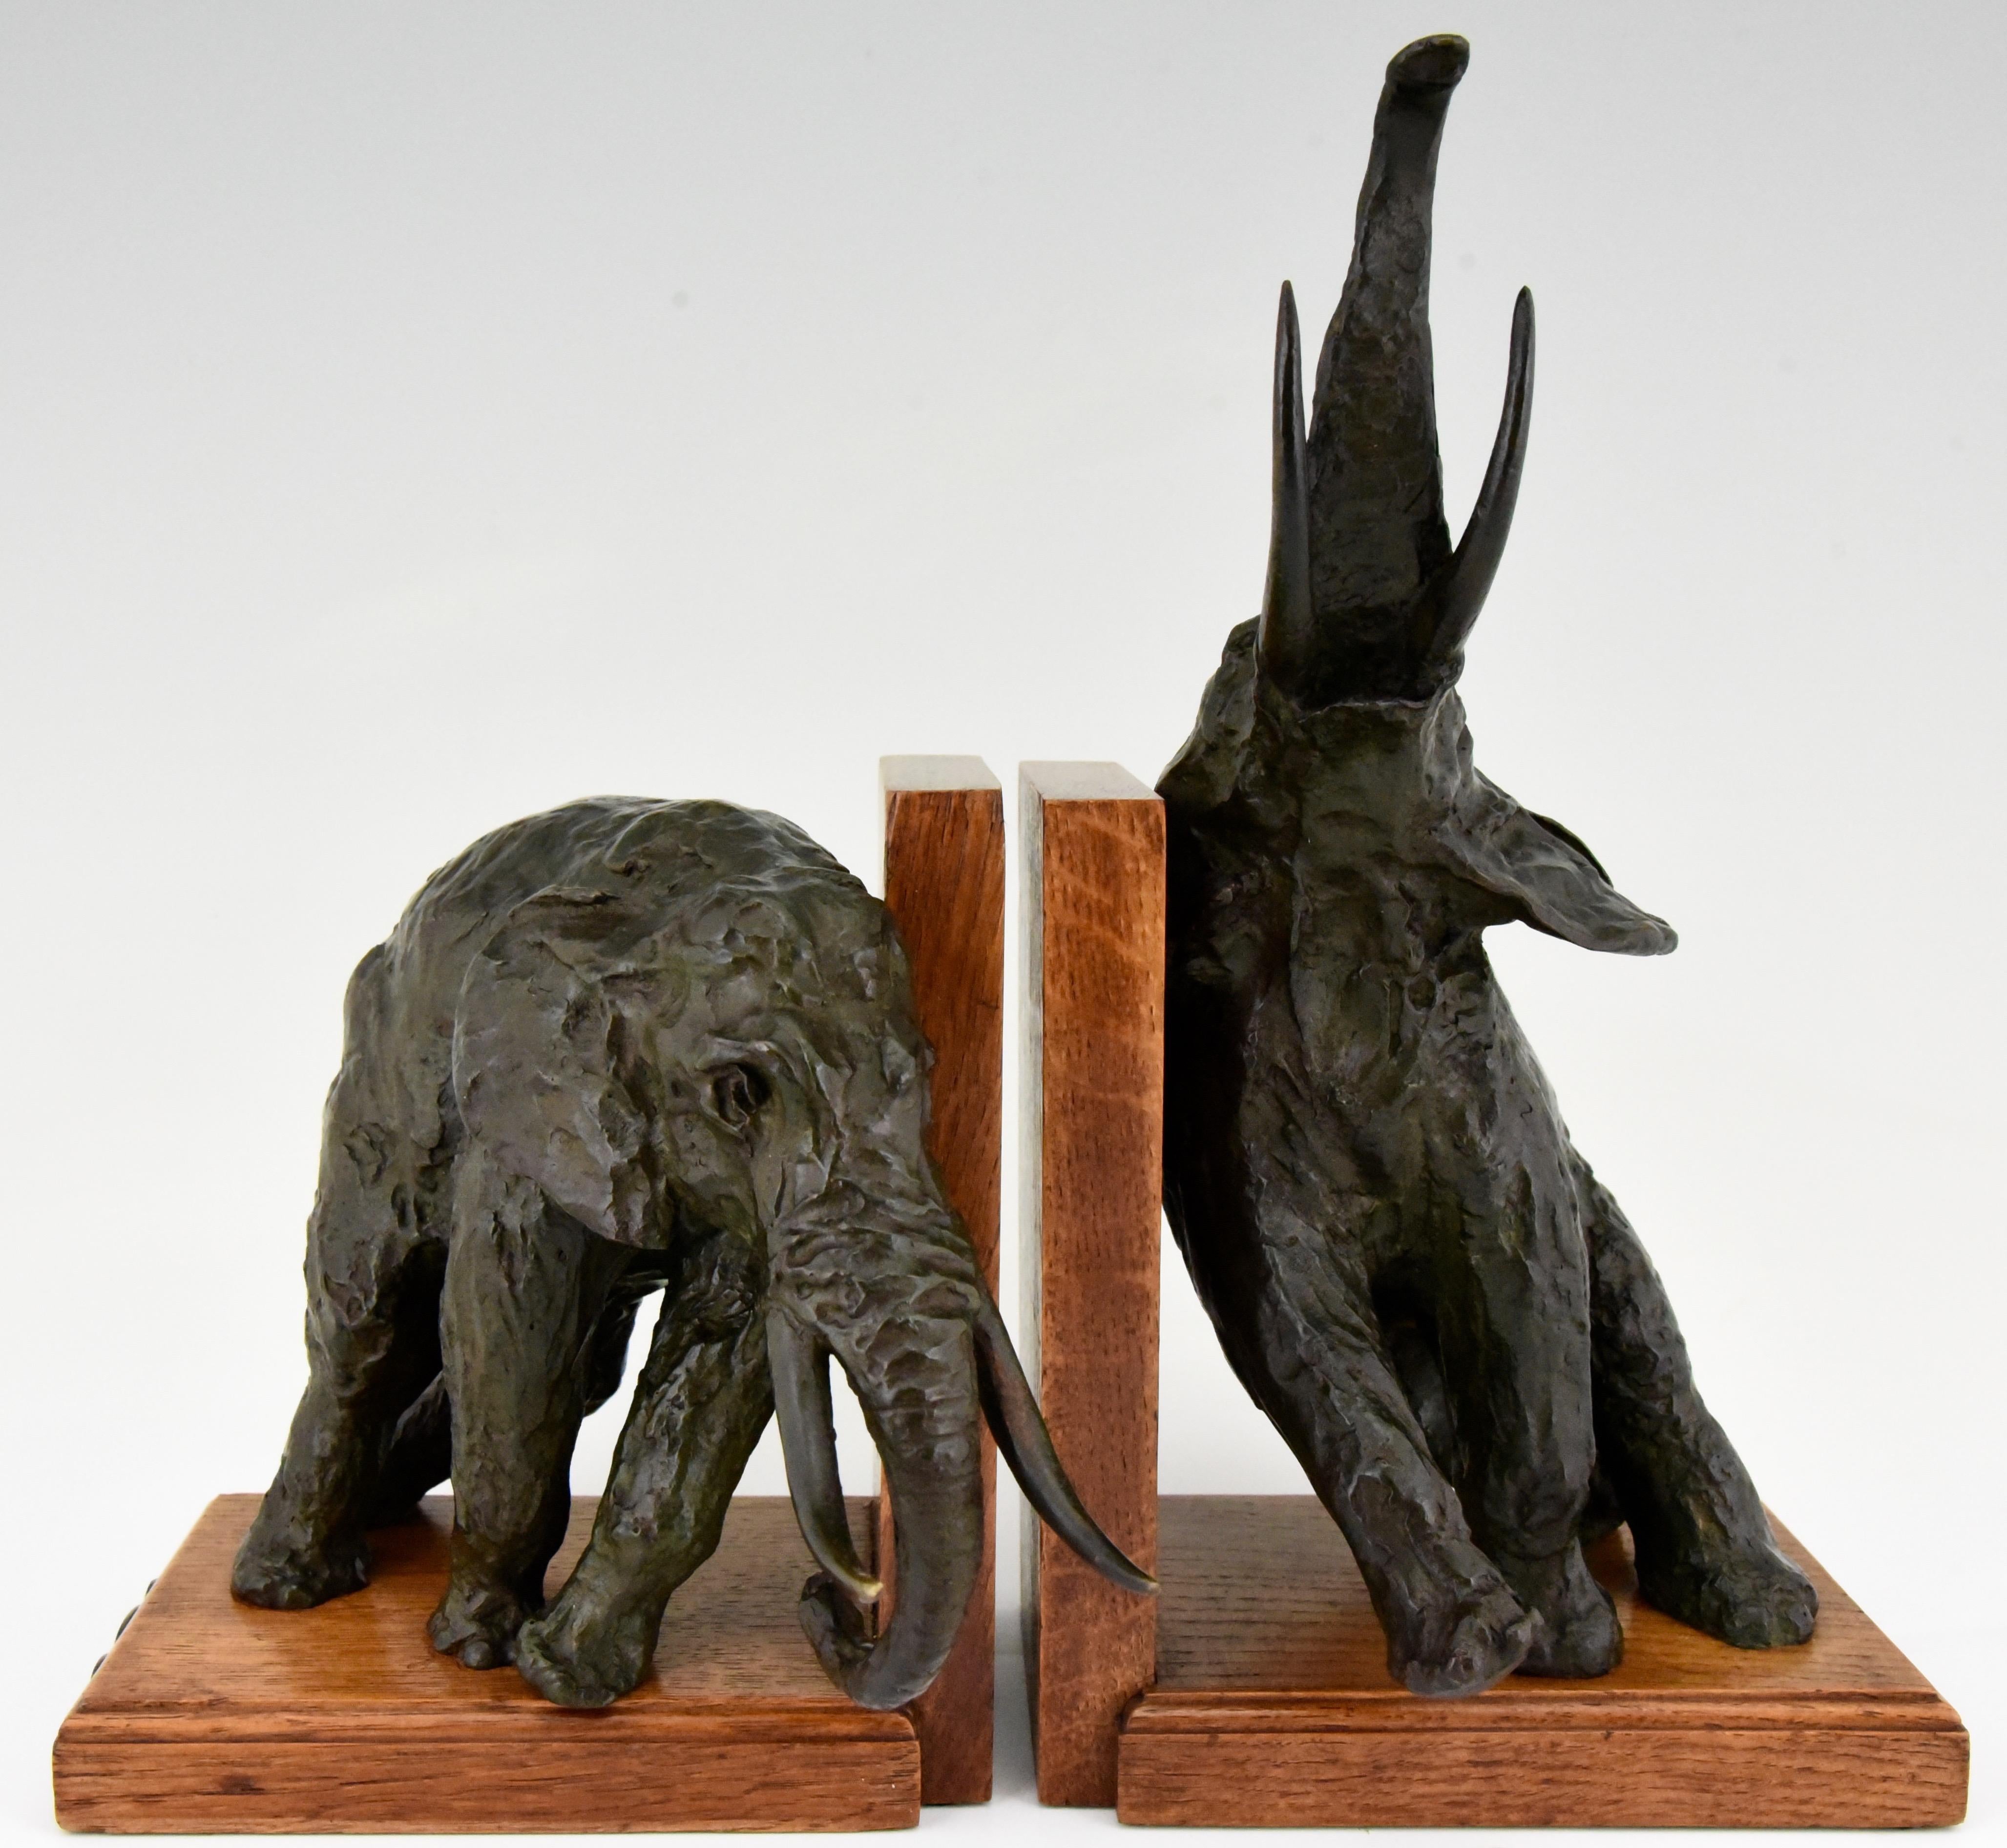 Impressive pair of bronze elephant bookends by the famous French artist Ary Bitter. The bronze sculptures have a beautiful patina and stand on wooden bases, circa 1920. Cast by Susse Freres, Paris.
Size:
H. 17 cm x L. 19 cm. x W. 17.5 cm.
H. 6.7